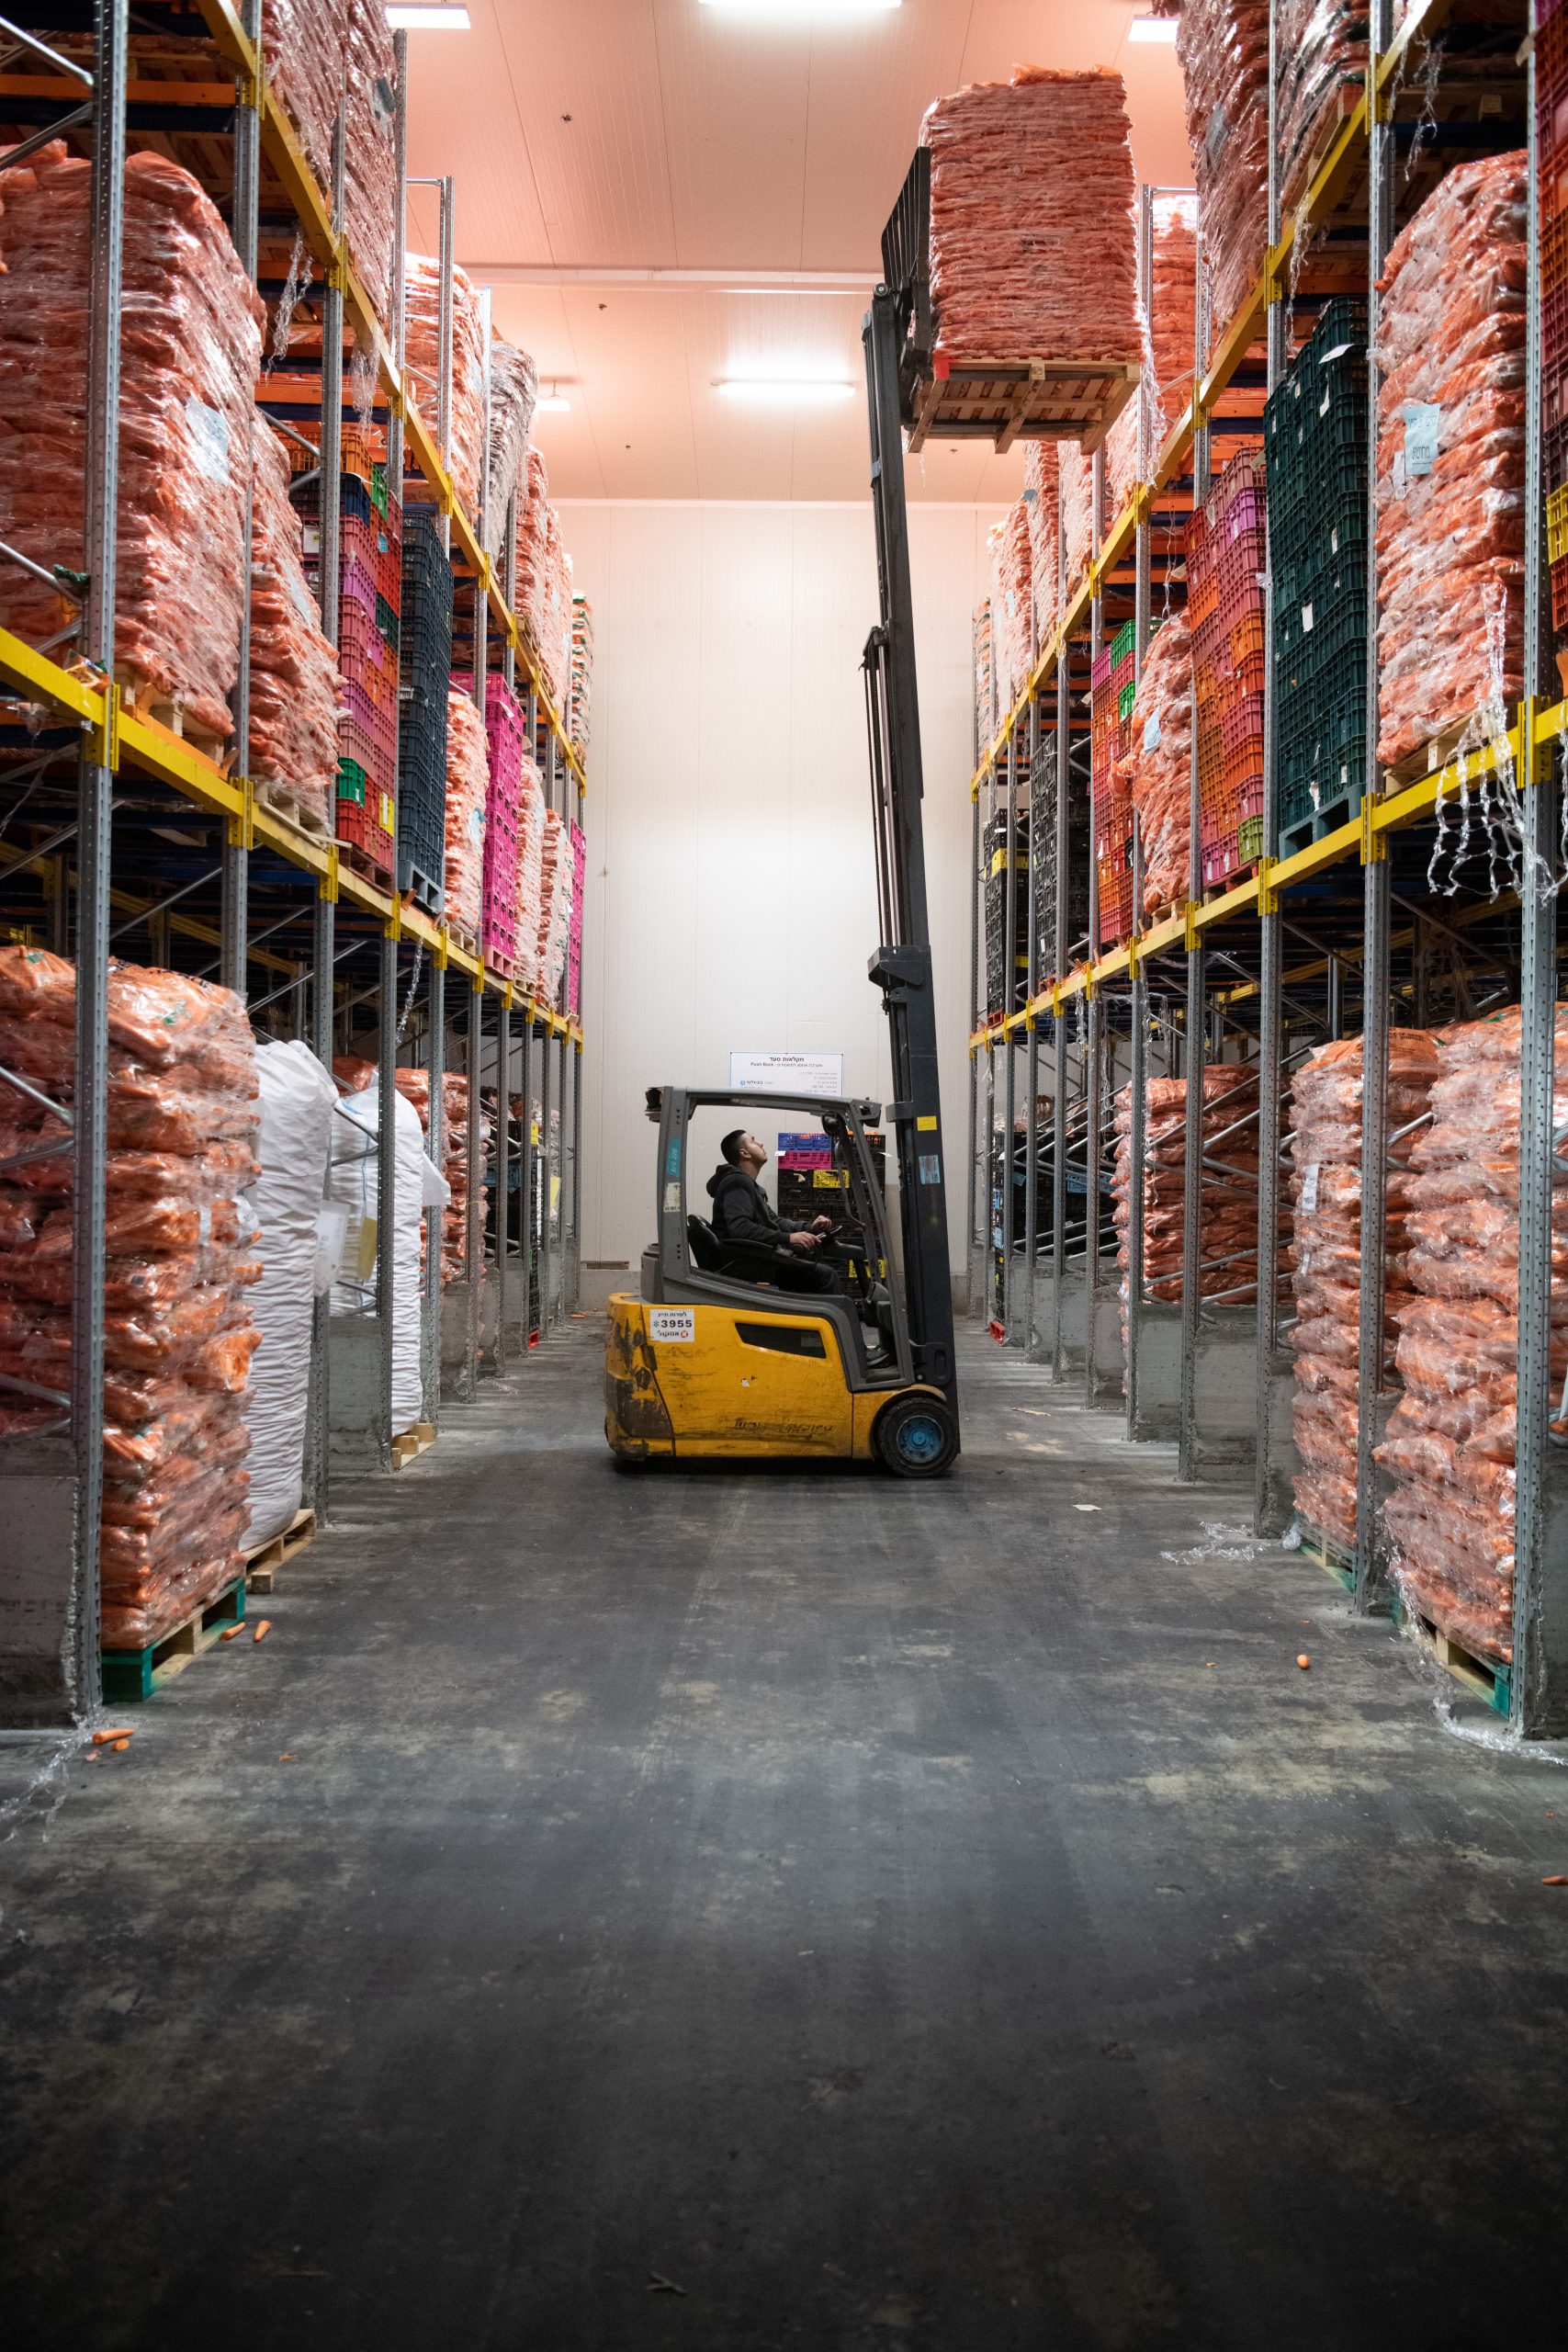 A forklift operator lifts goods in a factory of negev produce